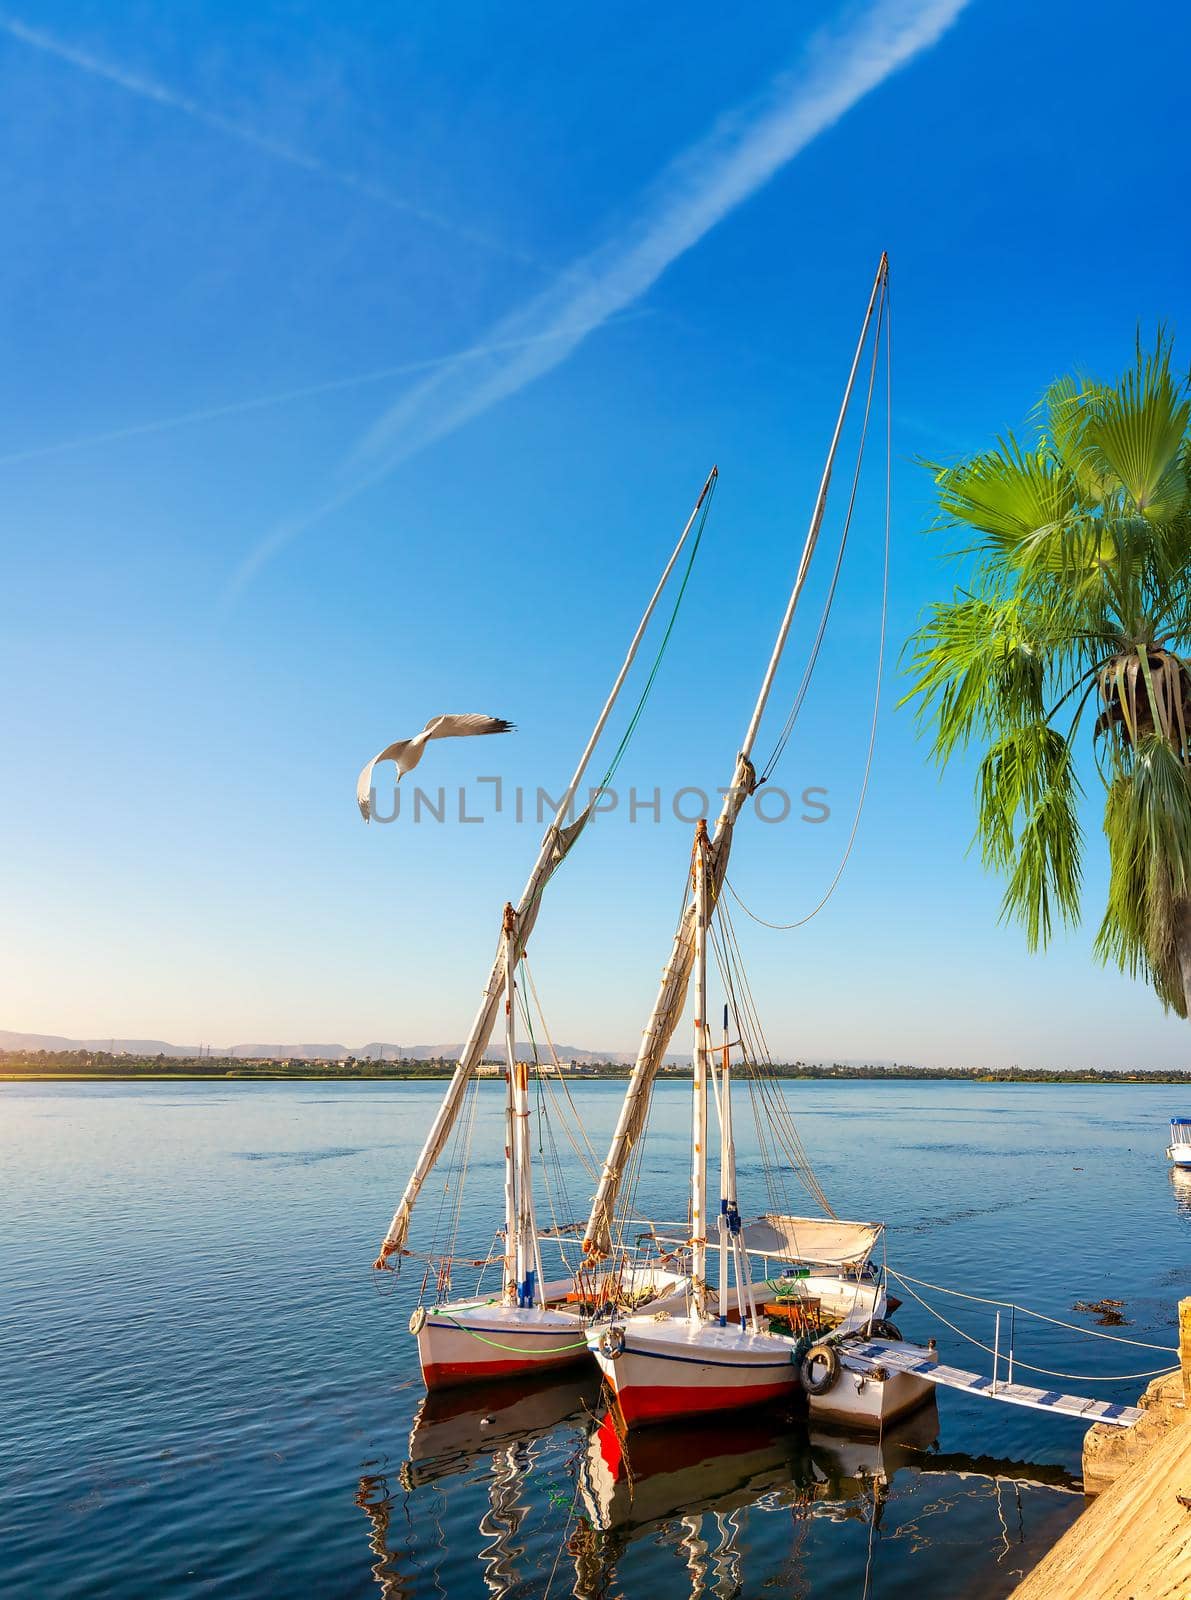 The sailboat in Aswan by Givaga